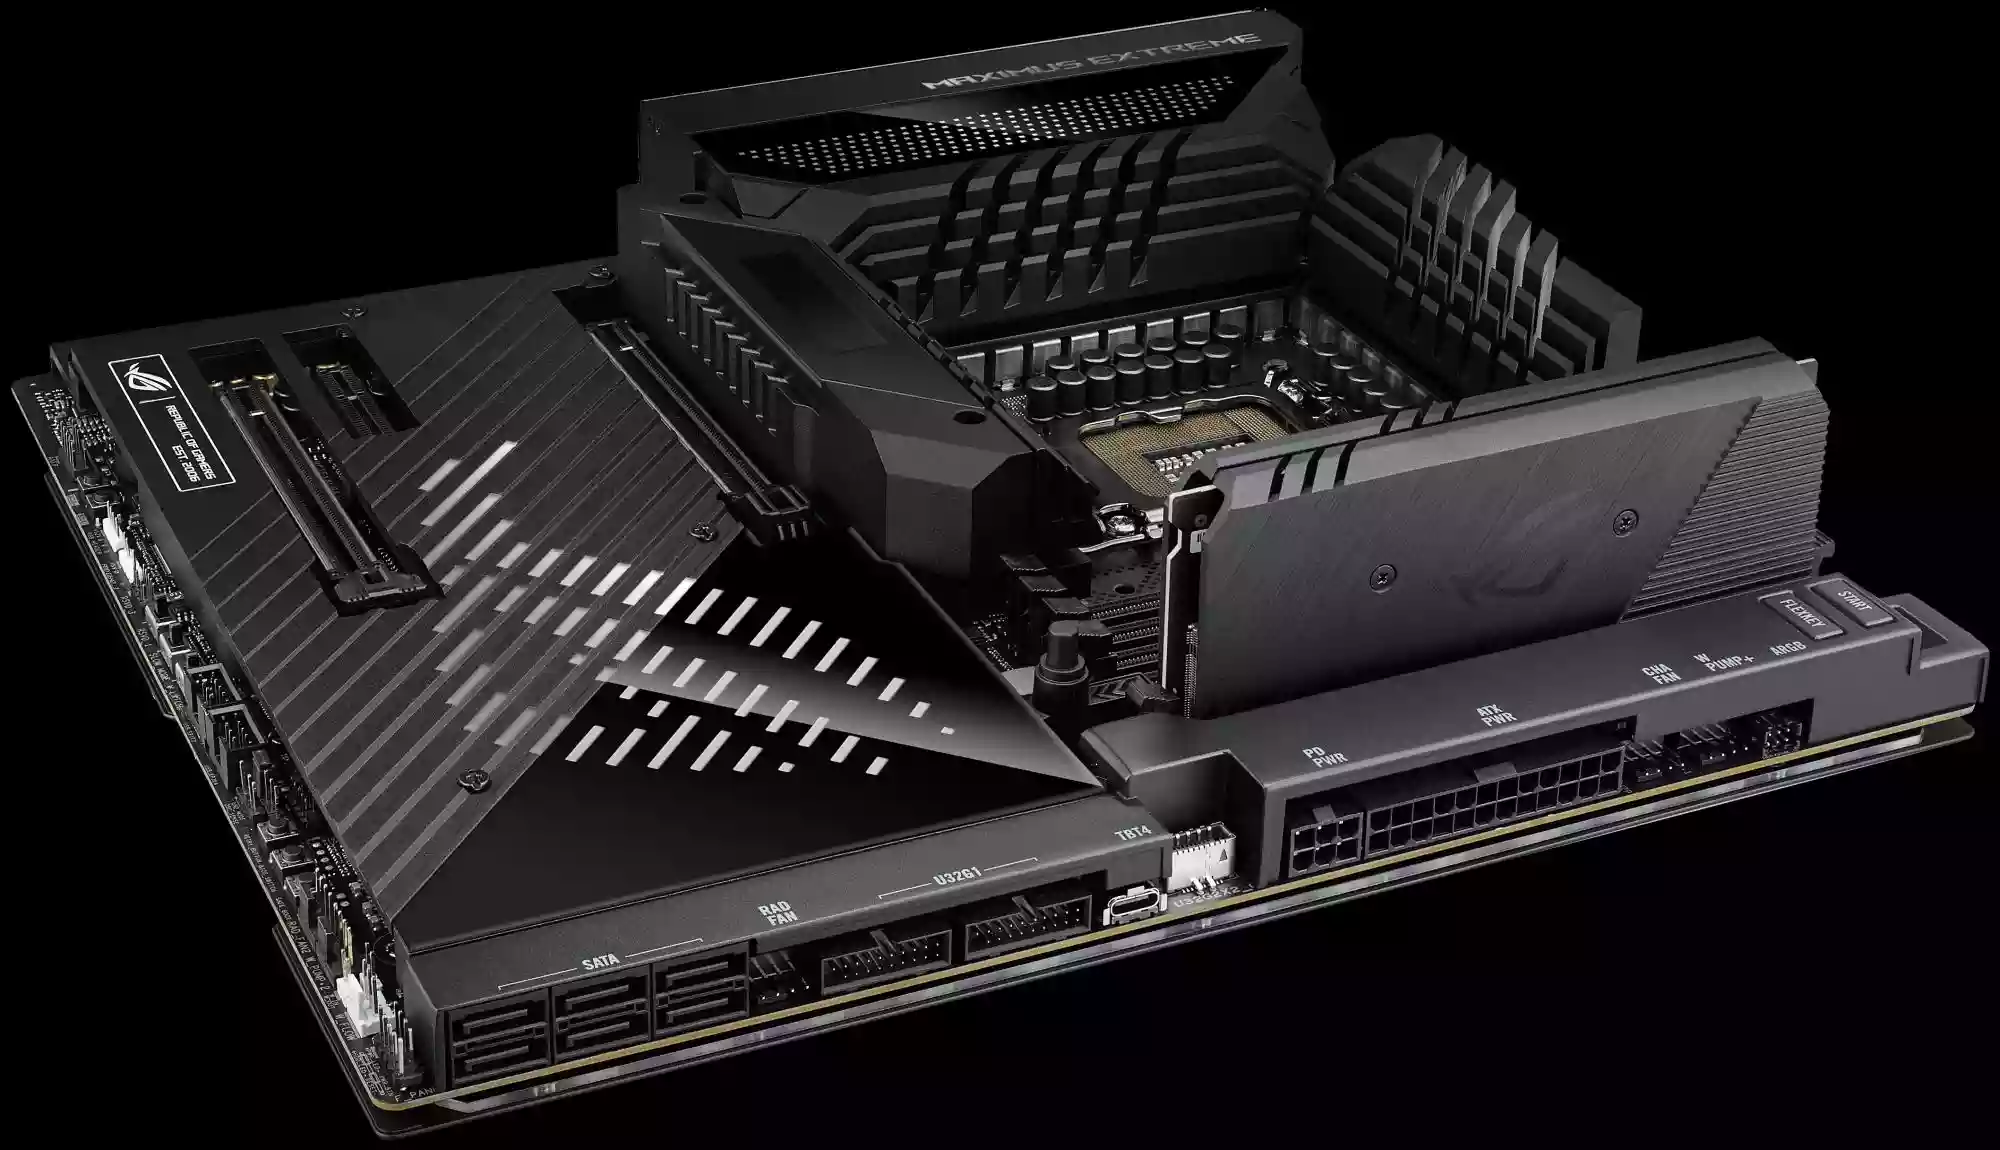 The ROG DIMM.2 add-in card